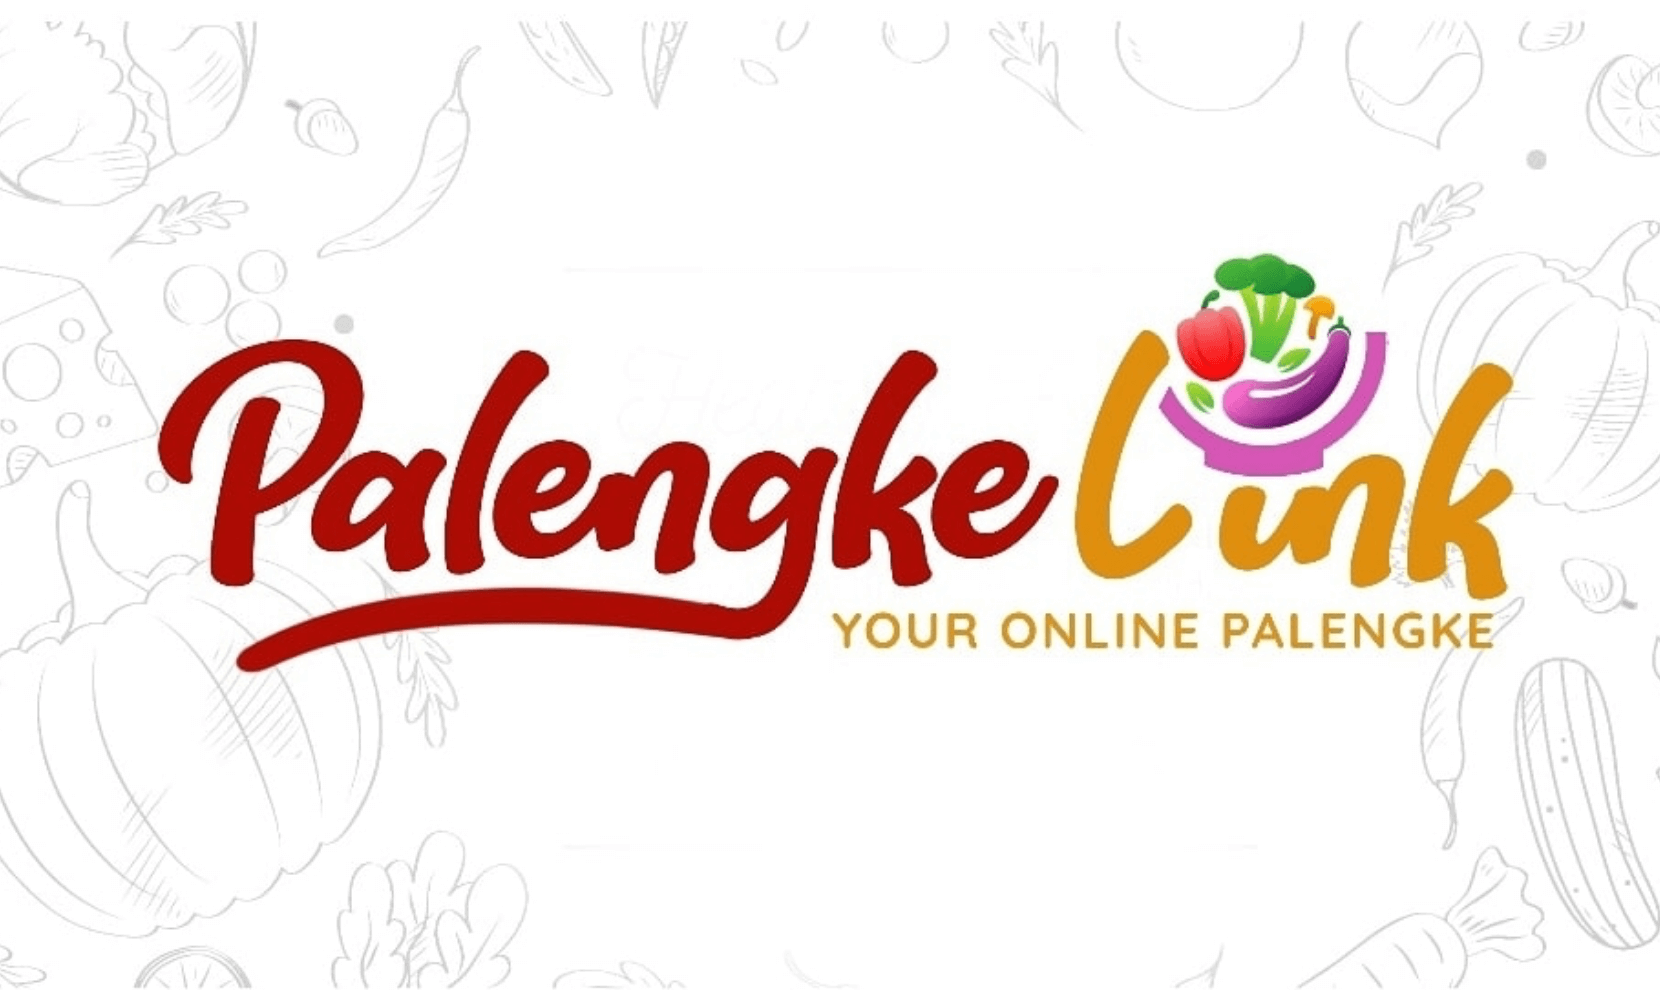 palengkelink-an-online-marketplace-in-the-philippines-launches-order-market-goods-online